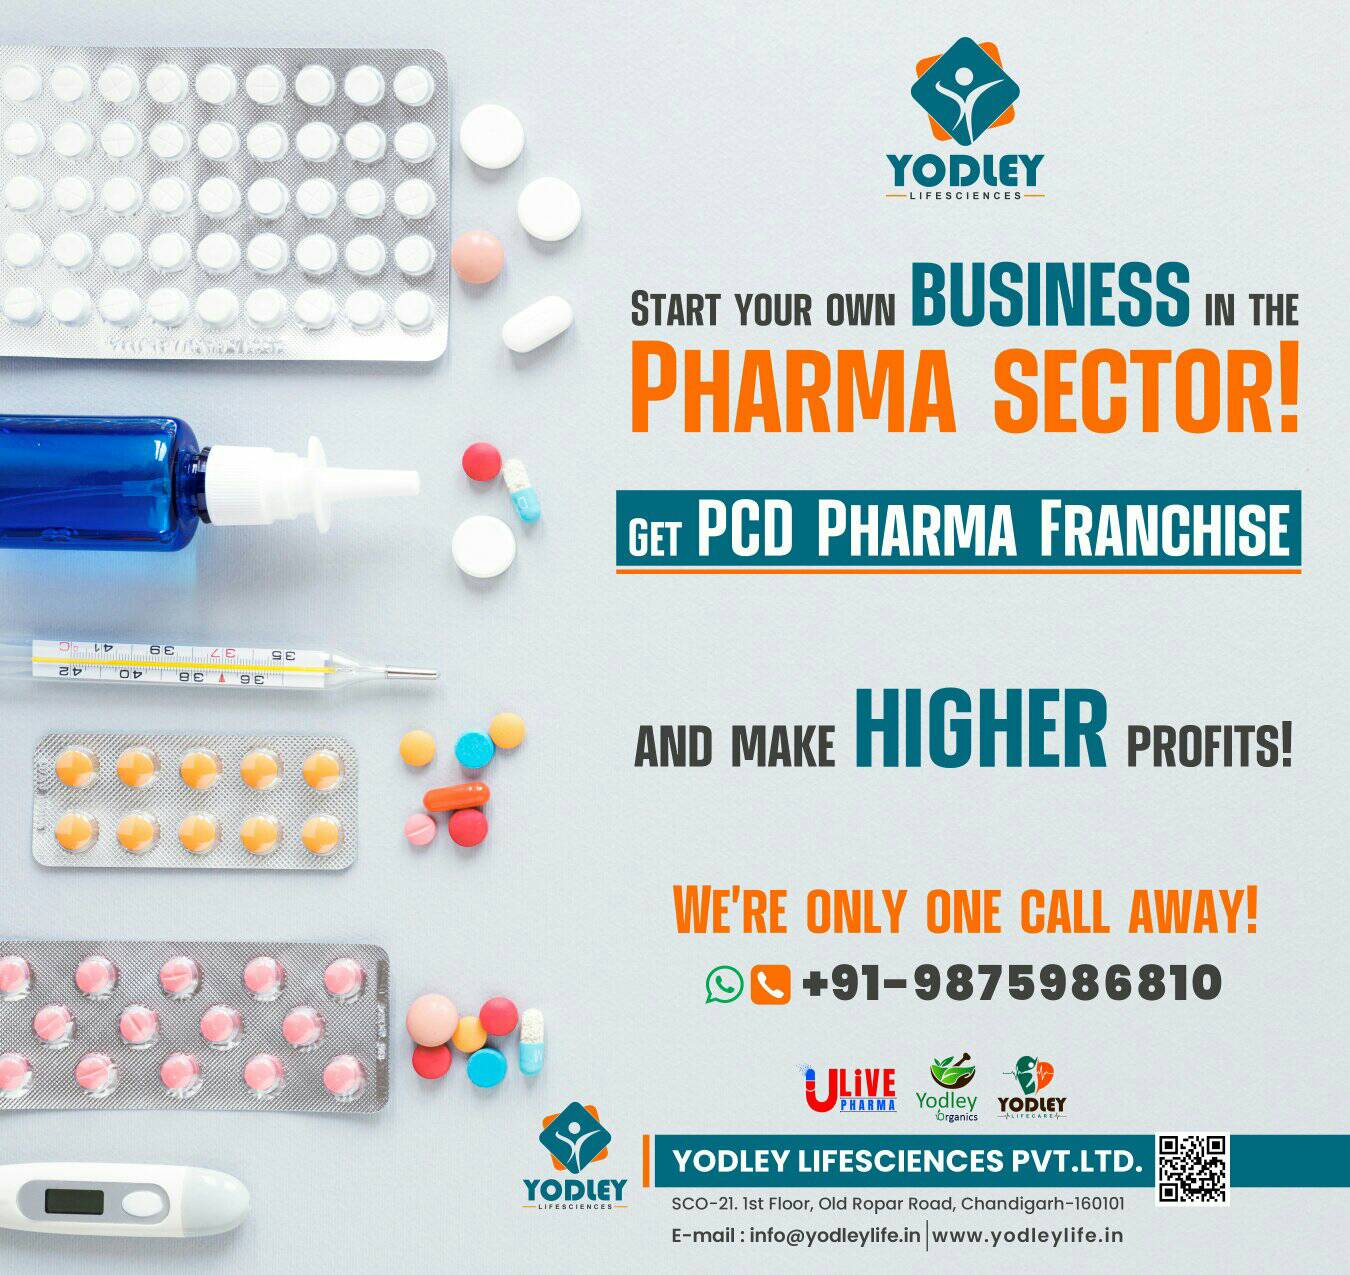 ’ nl ptt gt” YODLEY

ile starr vou own BUSINESS w me
~ PHARMA SECTOR!

ger PCD PHARMA FRANCHISE
ano make HIGHER prorirs:

WE'RE ONLY ONE CALL AWAY!
© +91-9875986810

 

|
ule & 8
Oo | EEE =
[E54

on YODLEY $CO-21. 1st Floor, Old Ropar Road, Chandigarh-160101
BE E-mail : info@yodieylife.in | www.yodleylite.in